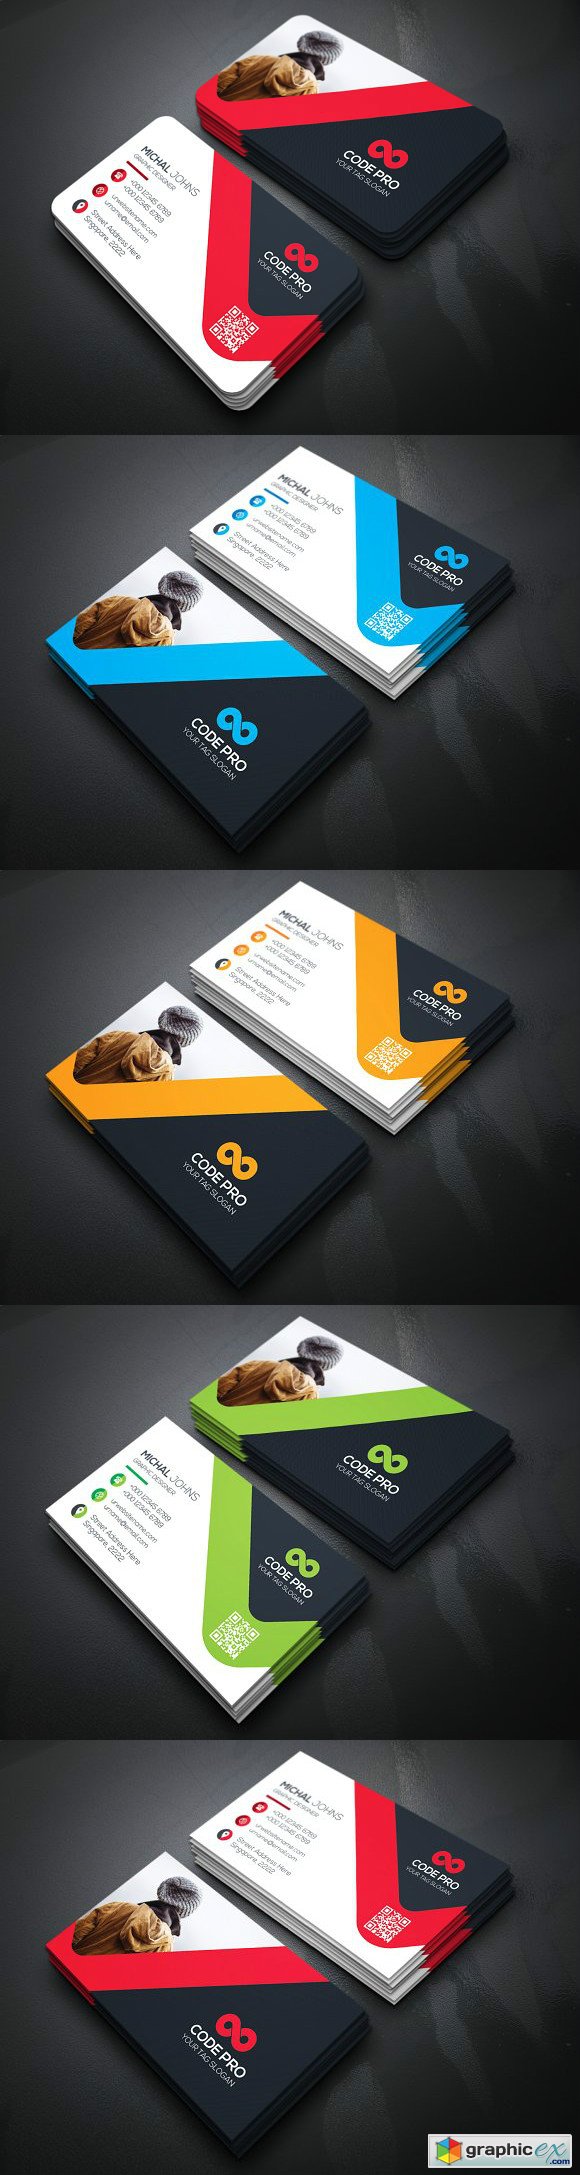 Personal Business Card 1311732